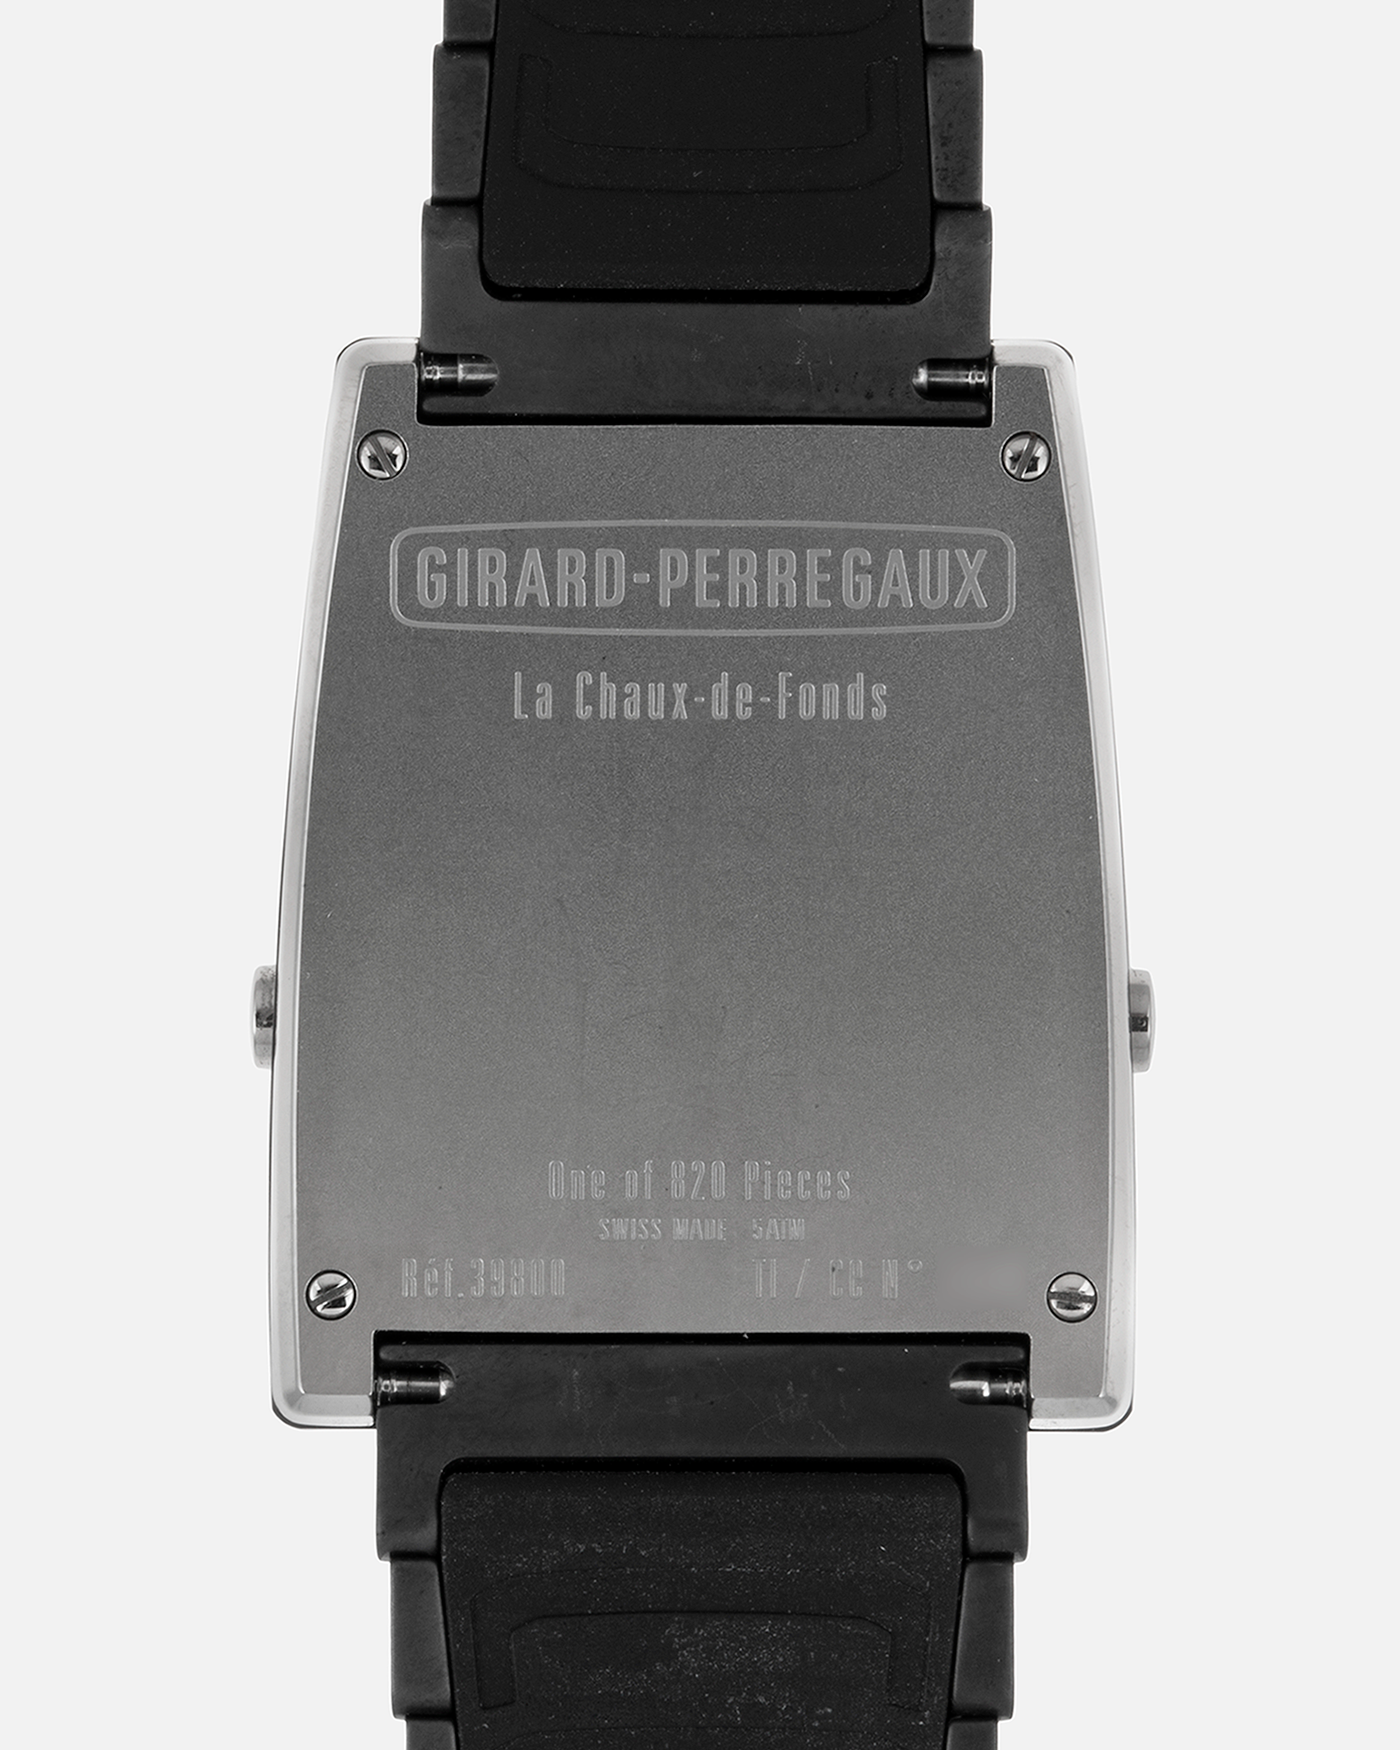 Brand: Girard Perregaux Year: 2022 Model: Casquette 2.0 Material: Scratch-Resistant Ceramic and Grade 5 Titanium Movement: In-house Cal. GP03980-1474, Quartz Case Diameter: 42.4mm x 33.6mm Bracelet/Strap: Girard Perregaux Ceramic Bracelet with Rubberized Interior and Signed Clasp